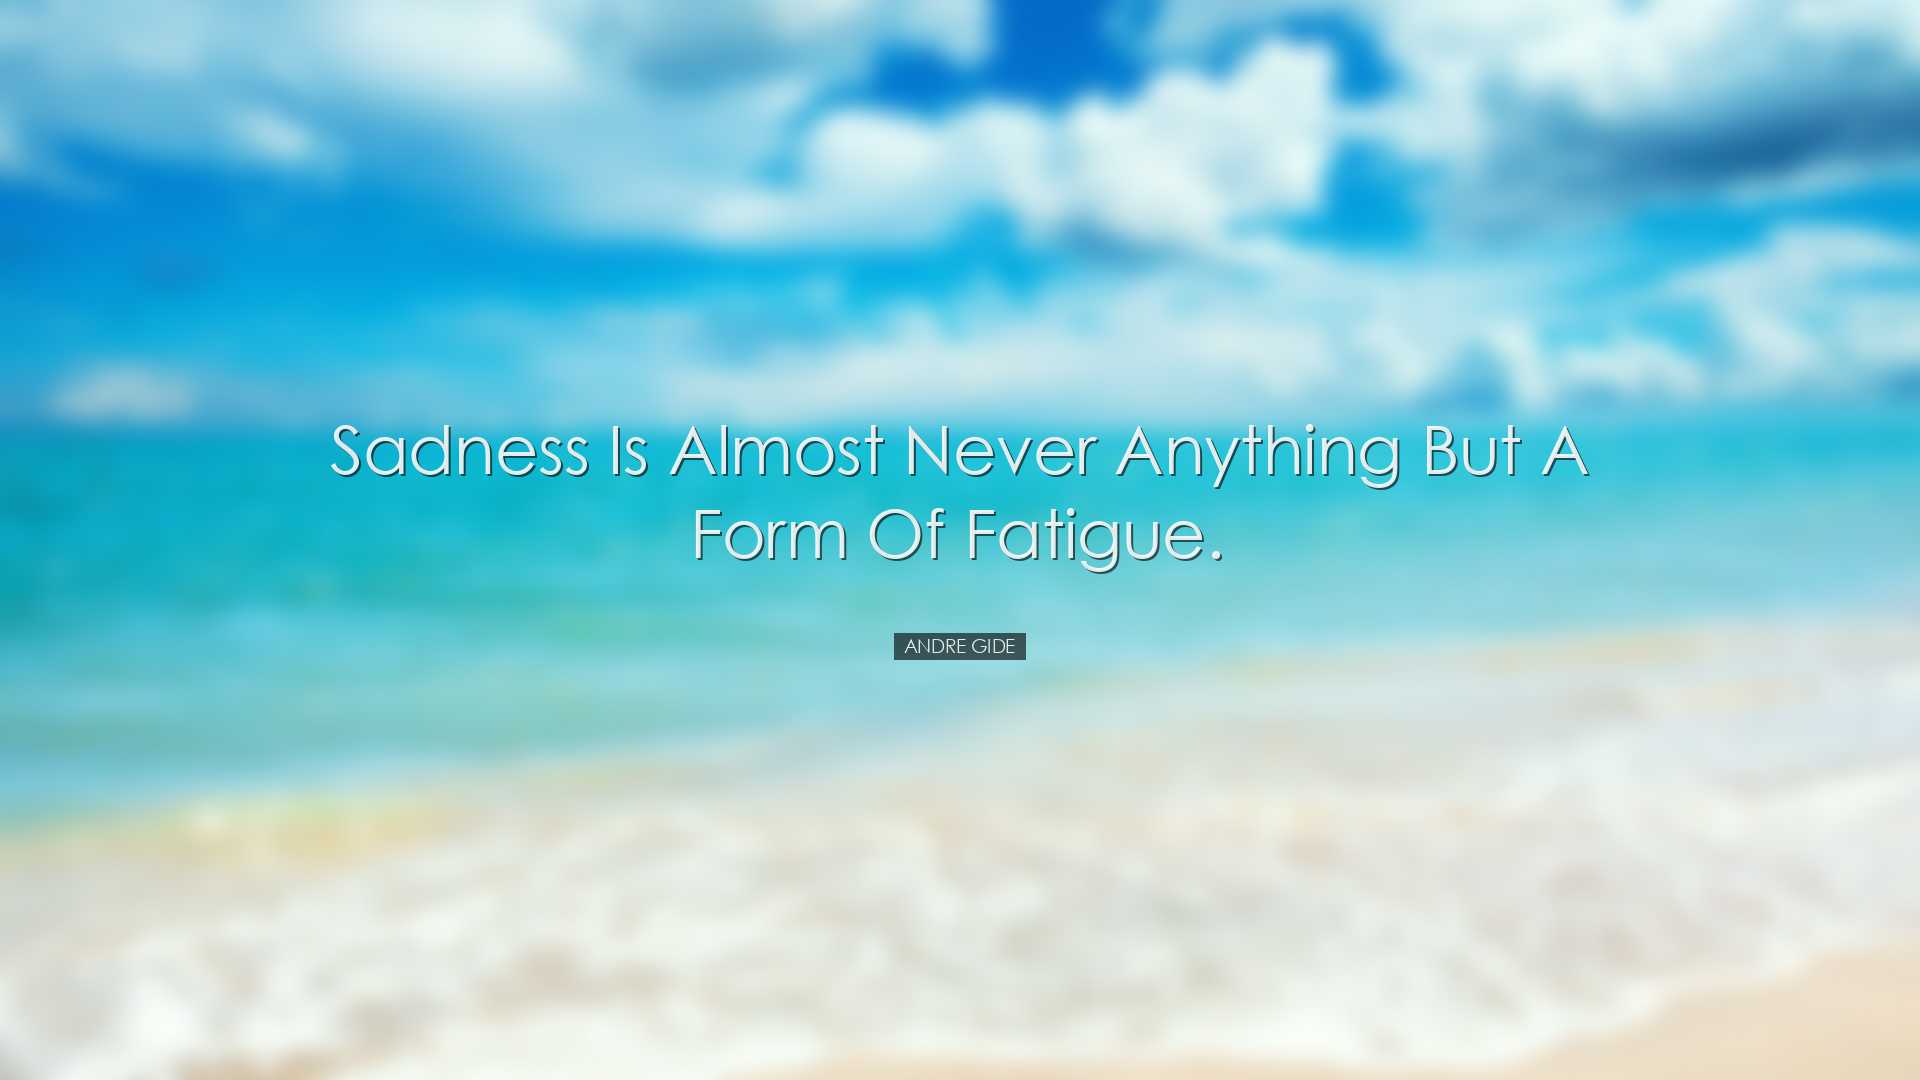 Sadness is almost never anything but a form of fatigue. - Andre Gi